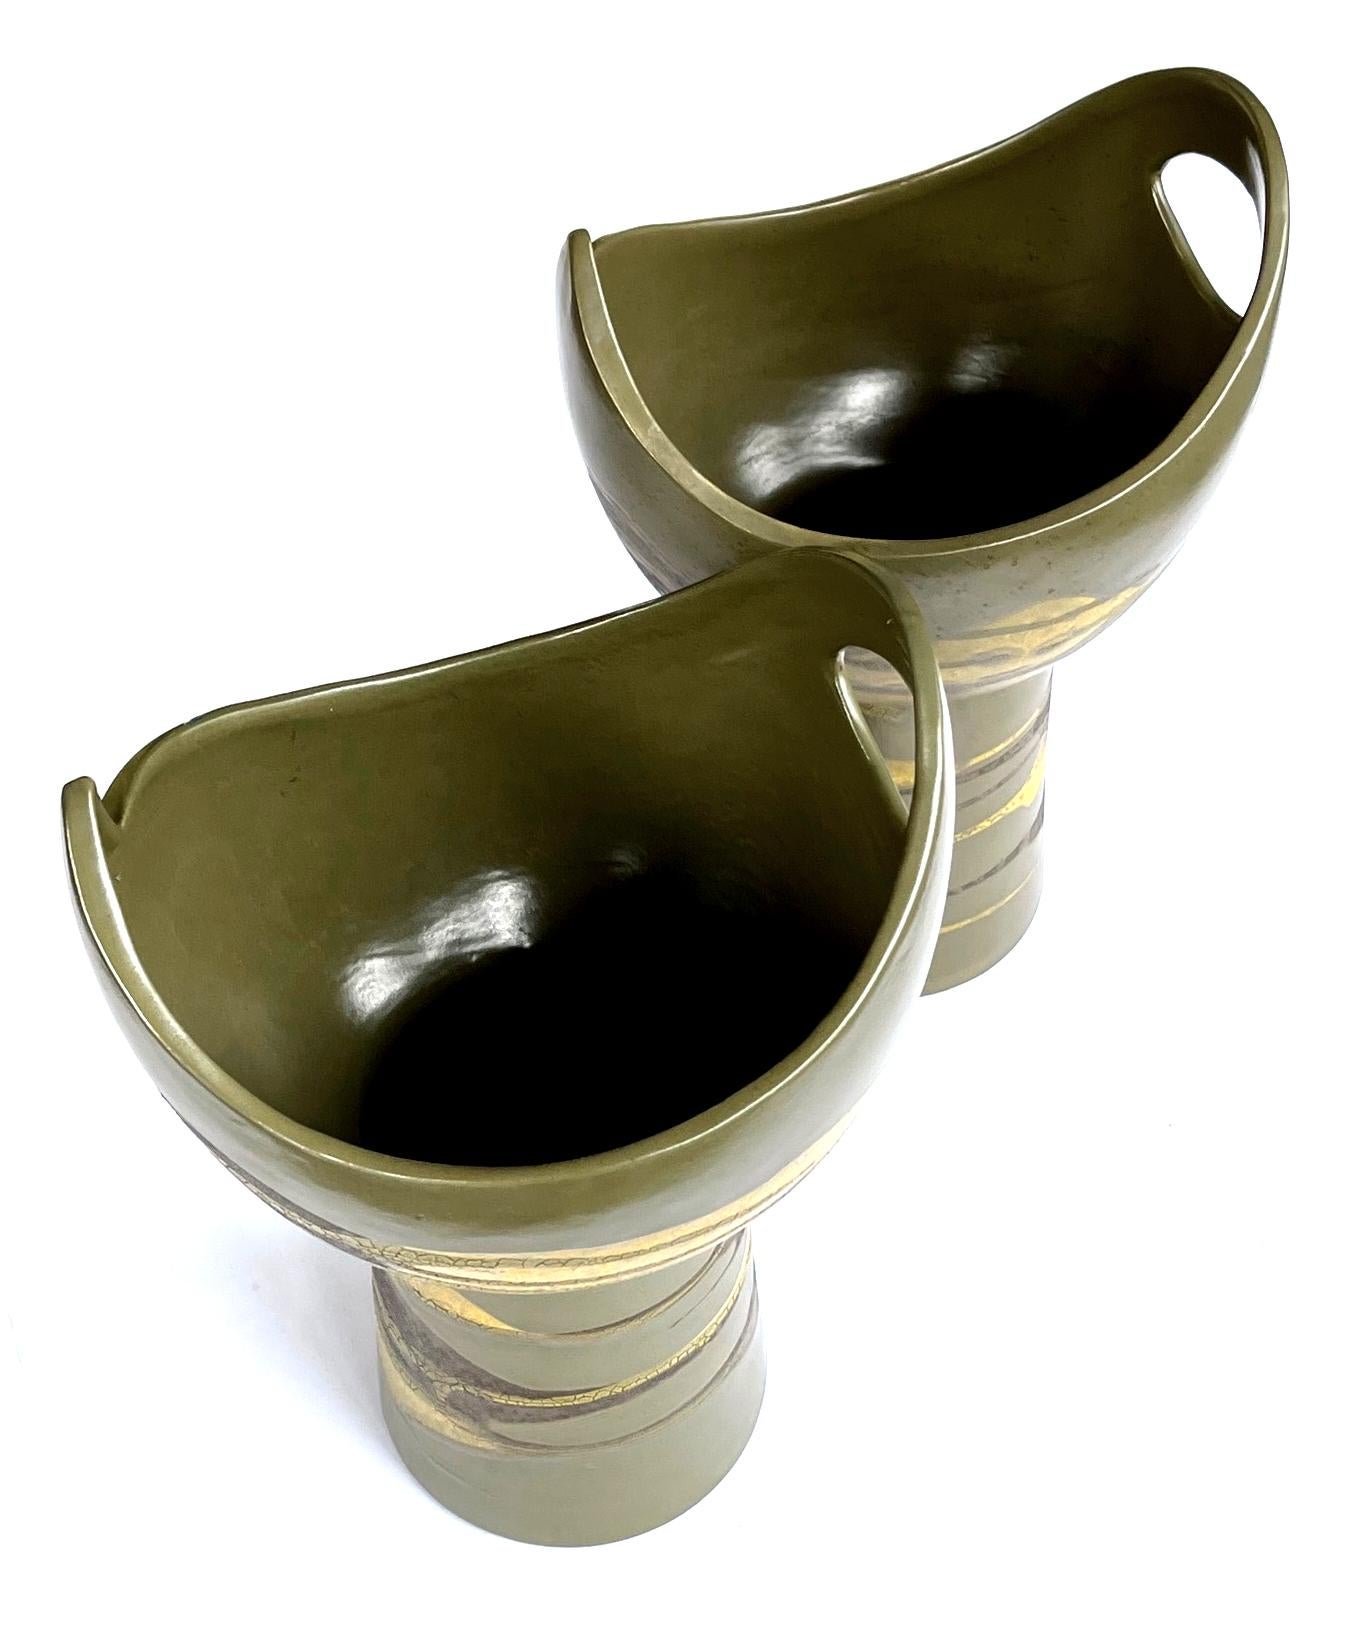 American Pr of Royal Haeger Cup-Shaped Vases W Brown & Yellow Glaze on Olive Green Ground